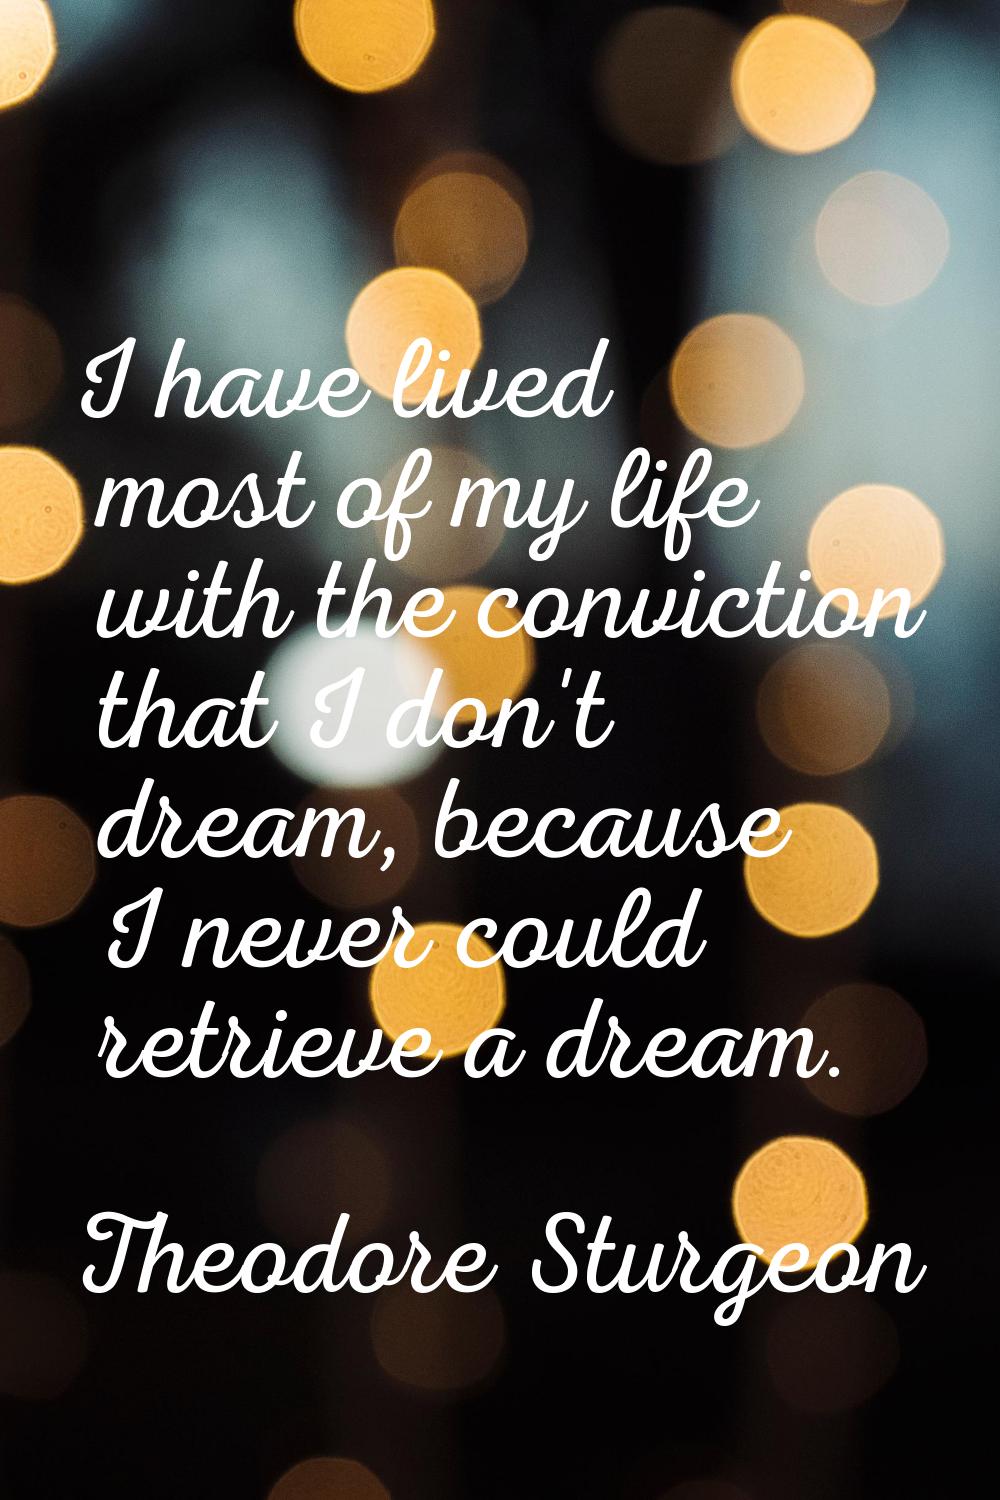 I have lived most of my life with the conviction that I don't dream, because I never could retrieve